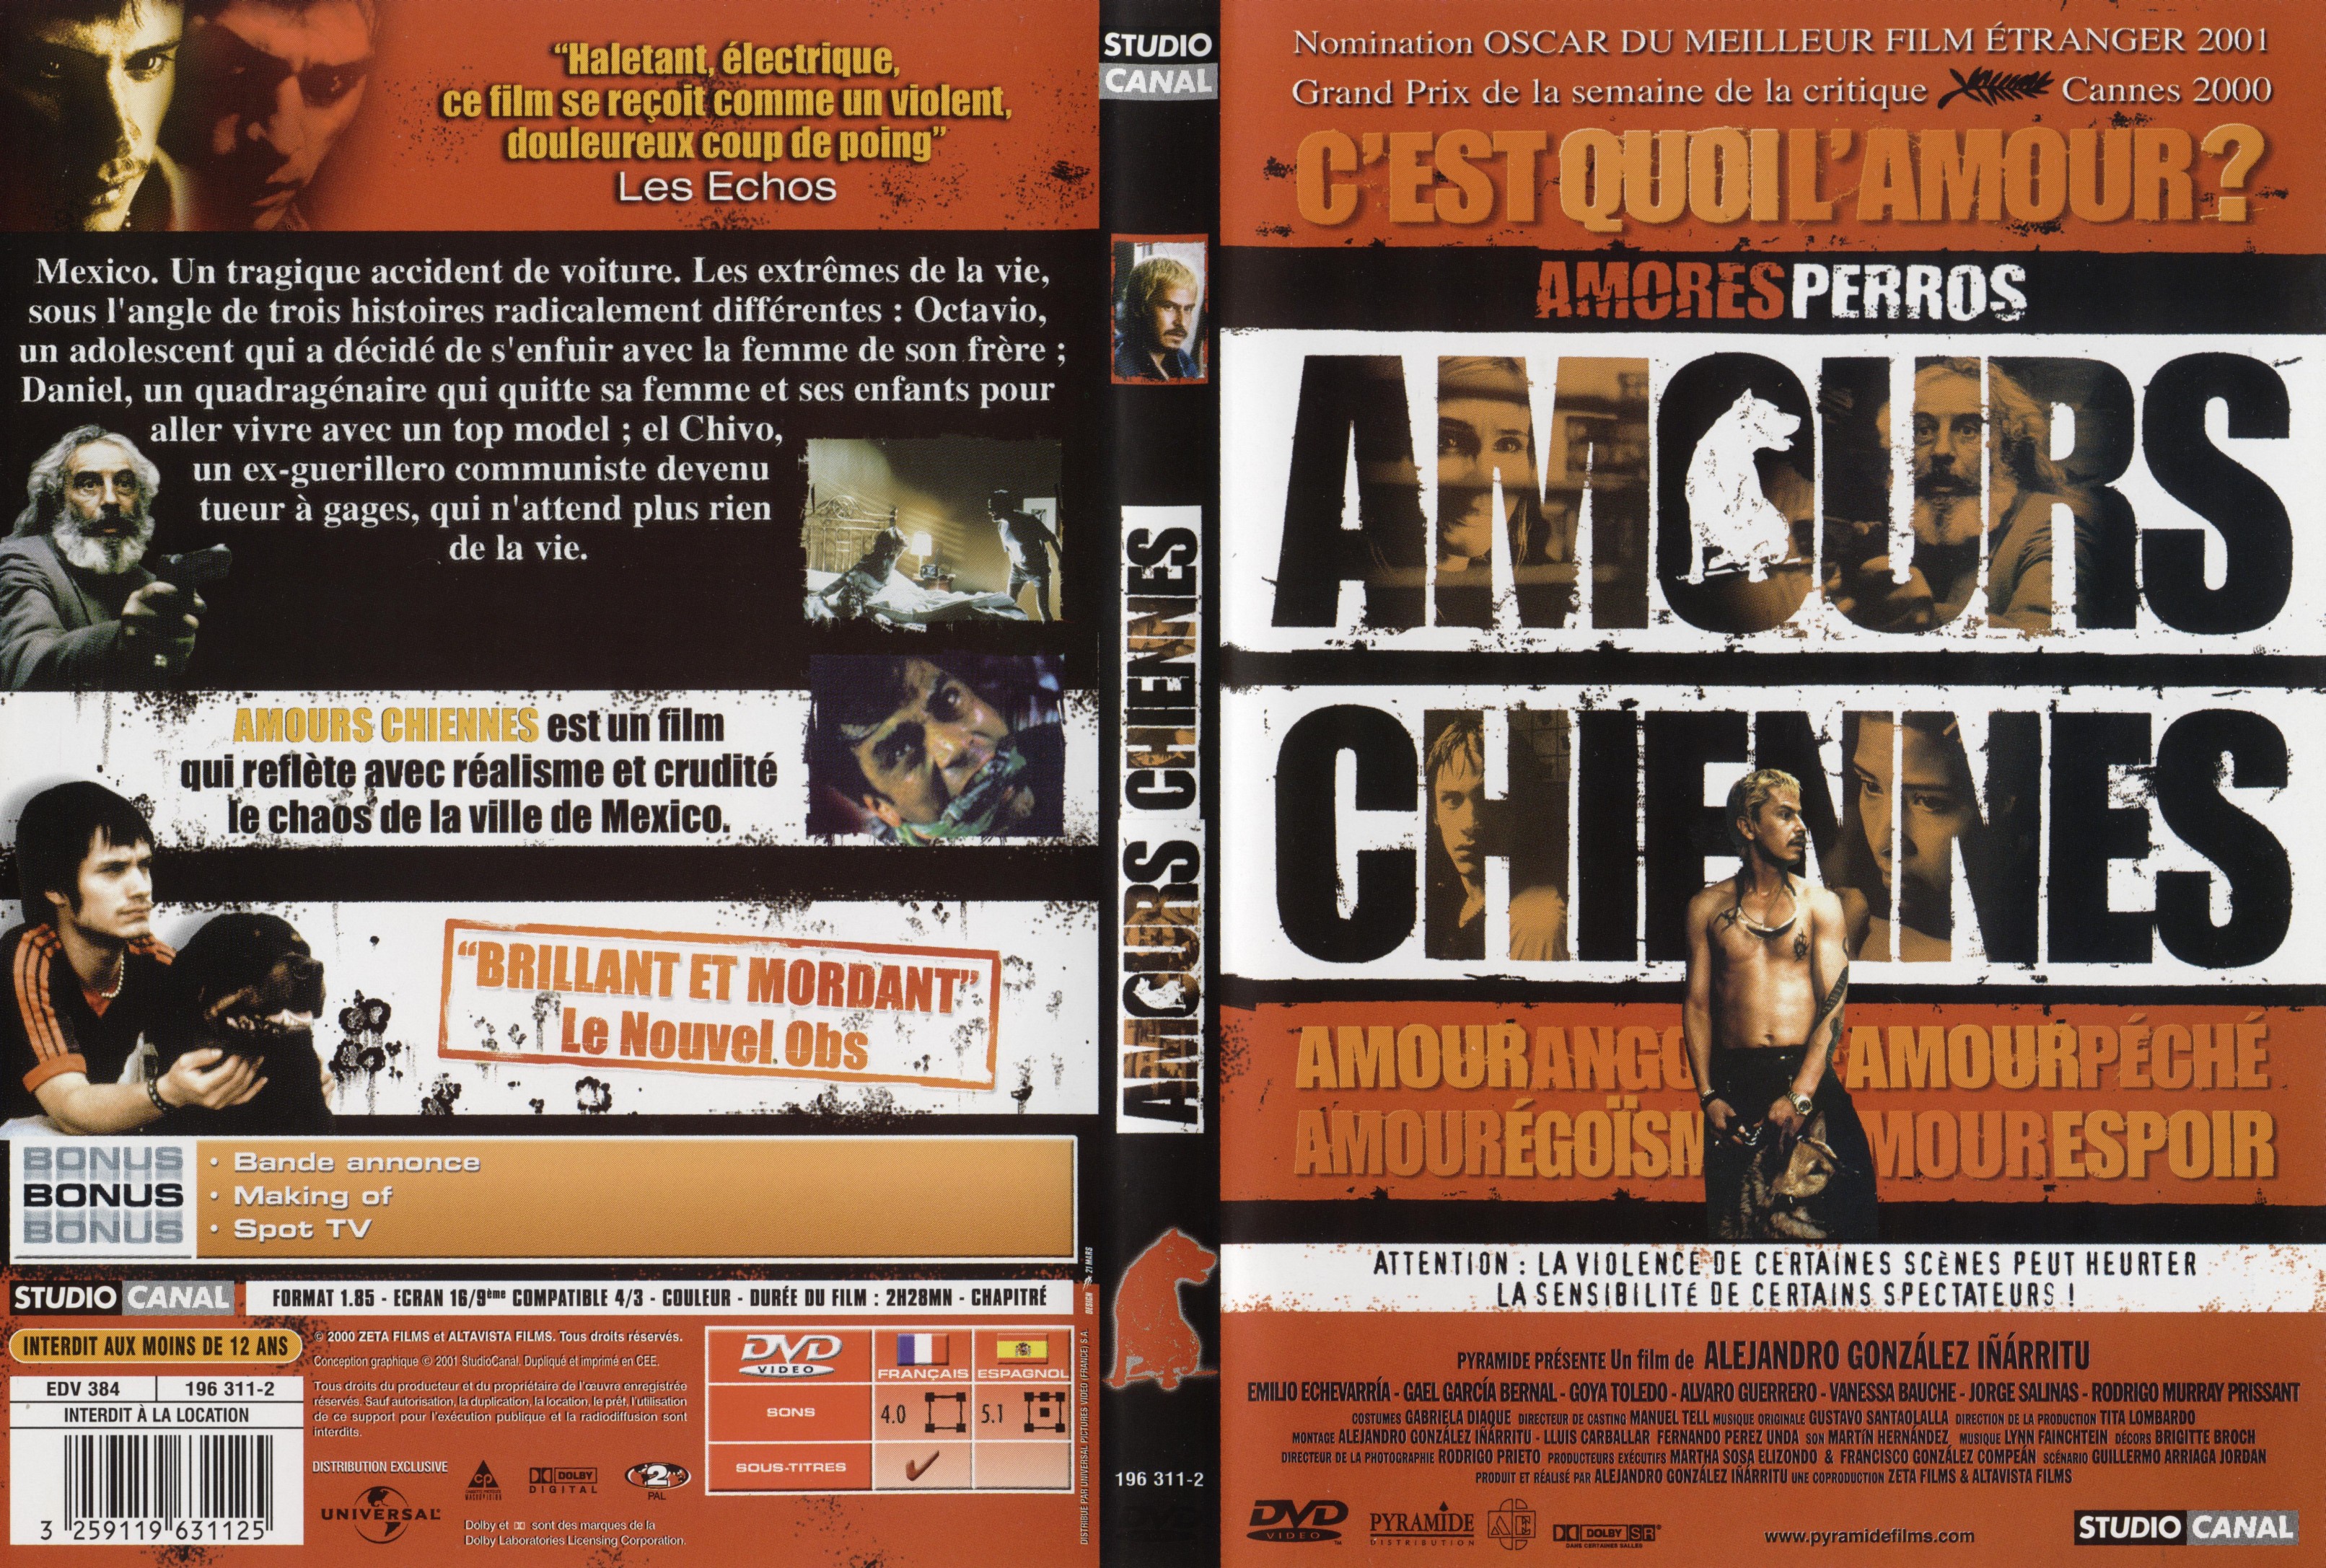 Jaquette DVD Amours chiennes